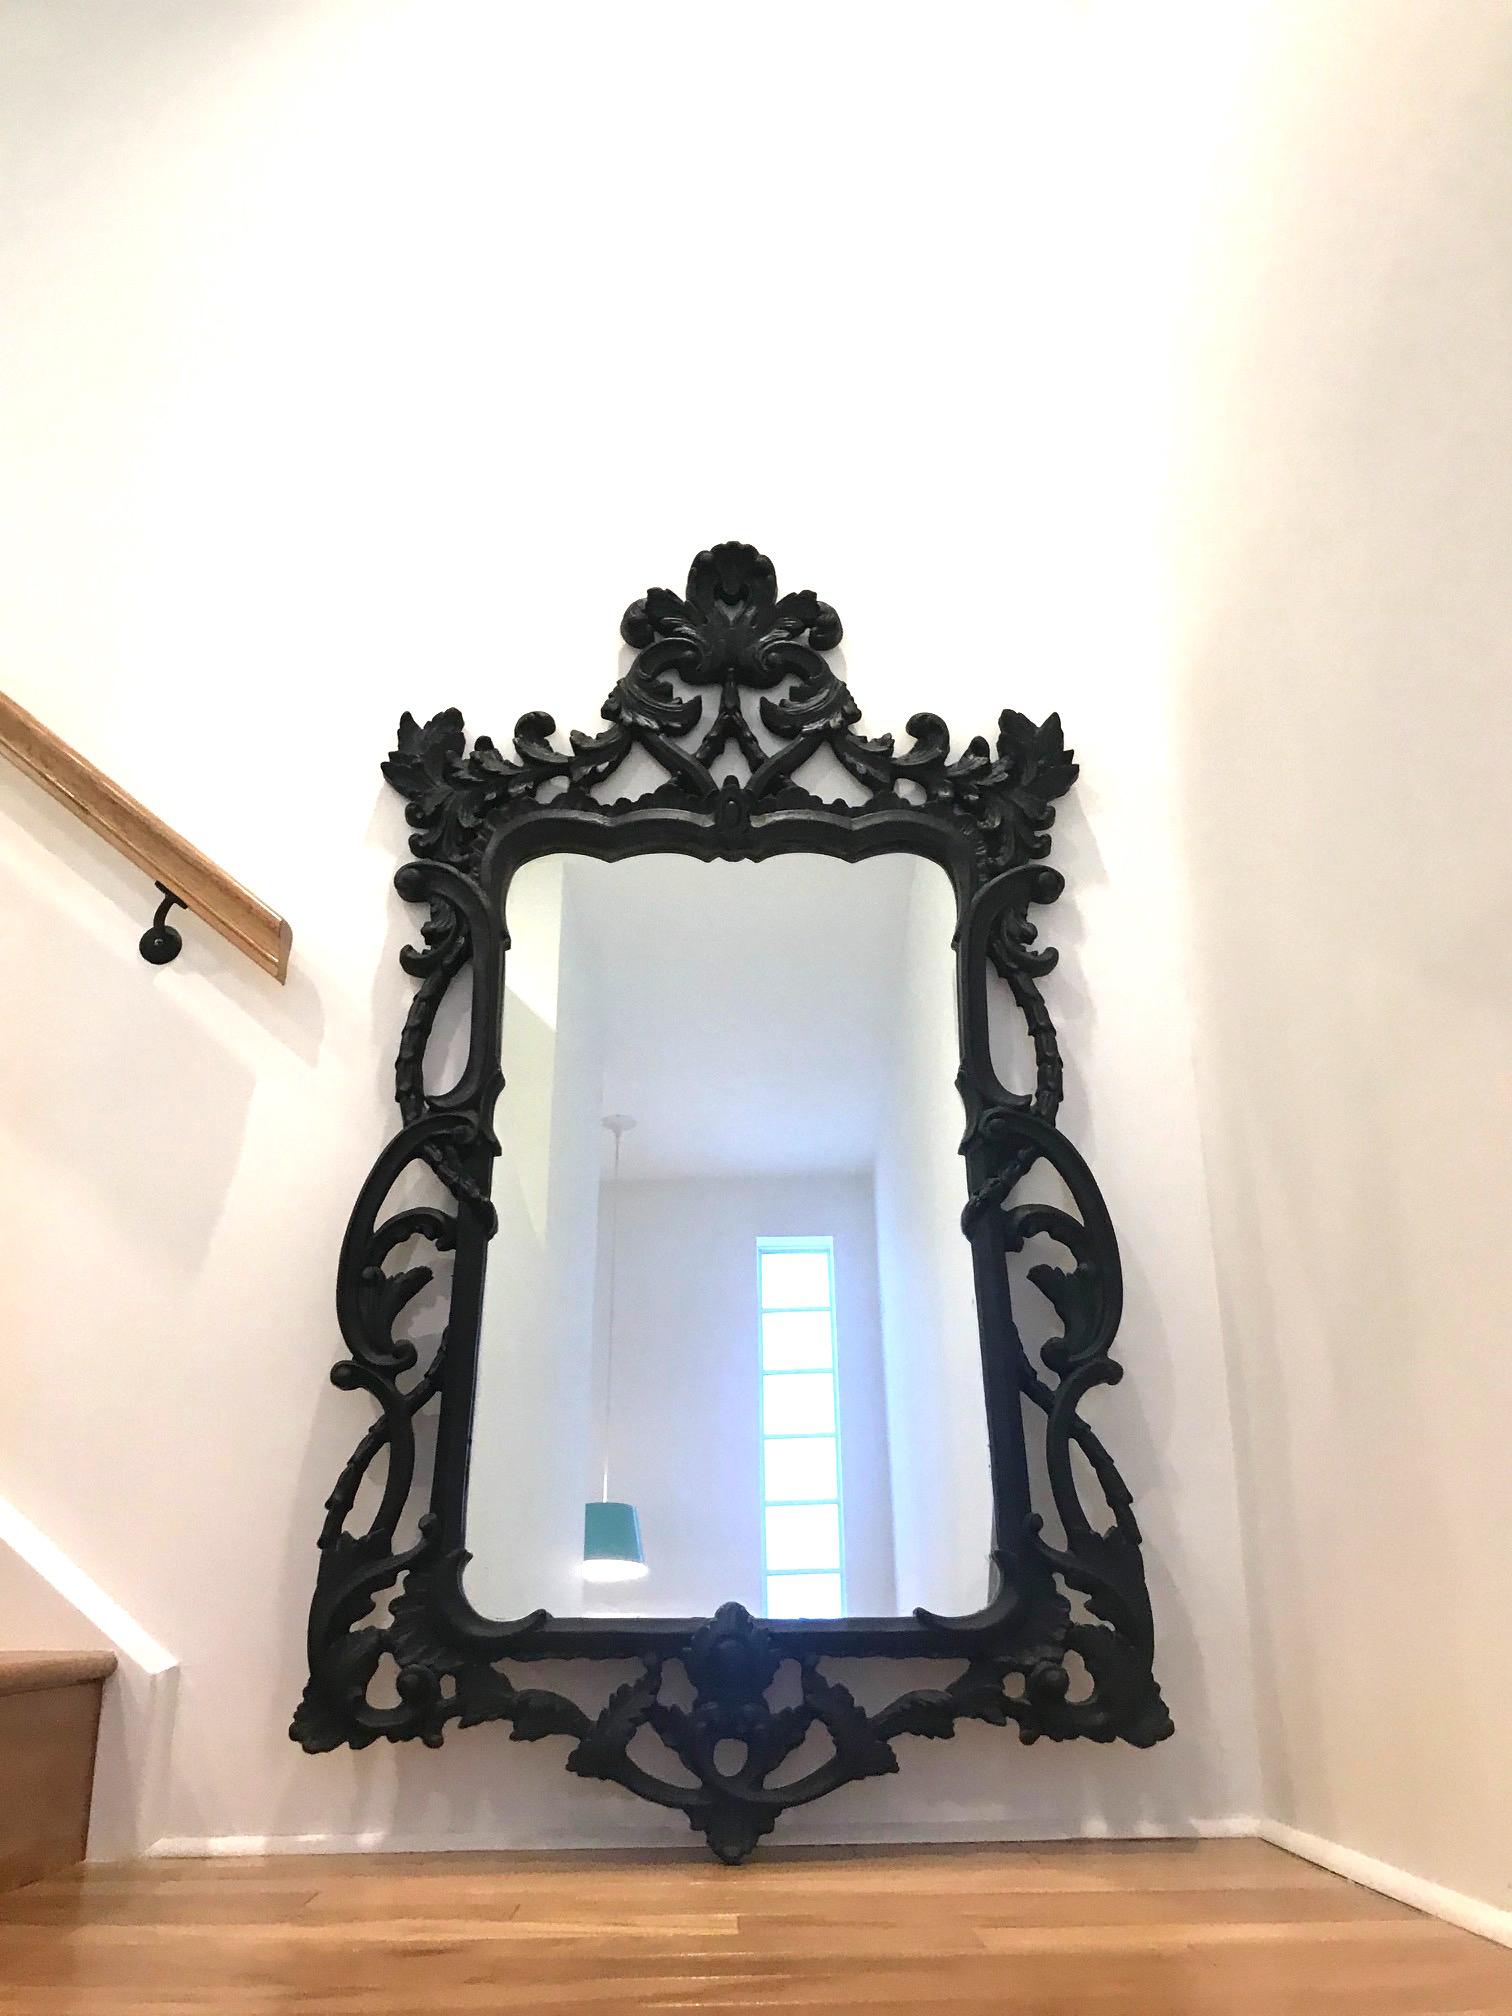 Hollywood Regency large mirror with traditional Rococo style carved wood frame. Mirror has shield design featuring a series hand carved scrolls with foliage details. The vintage ebonized finish has a slightly distressed quality which gives the